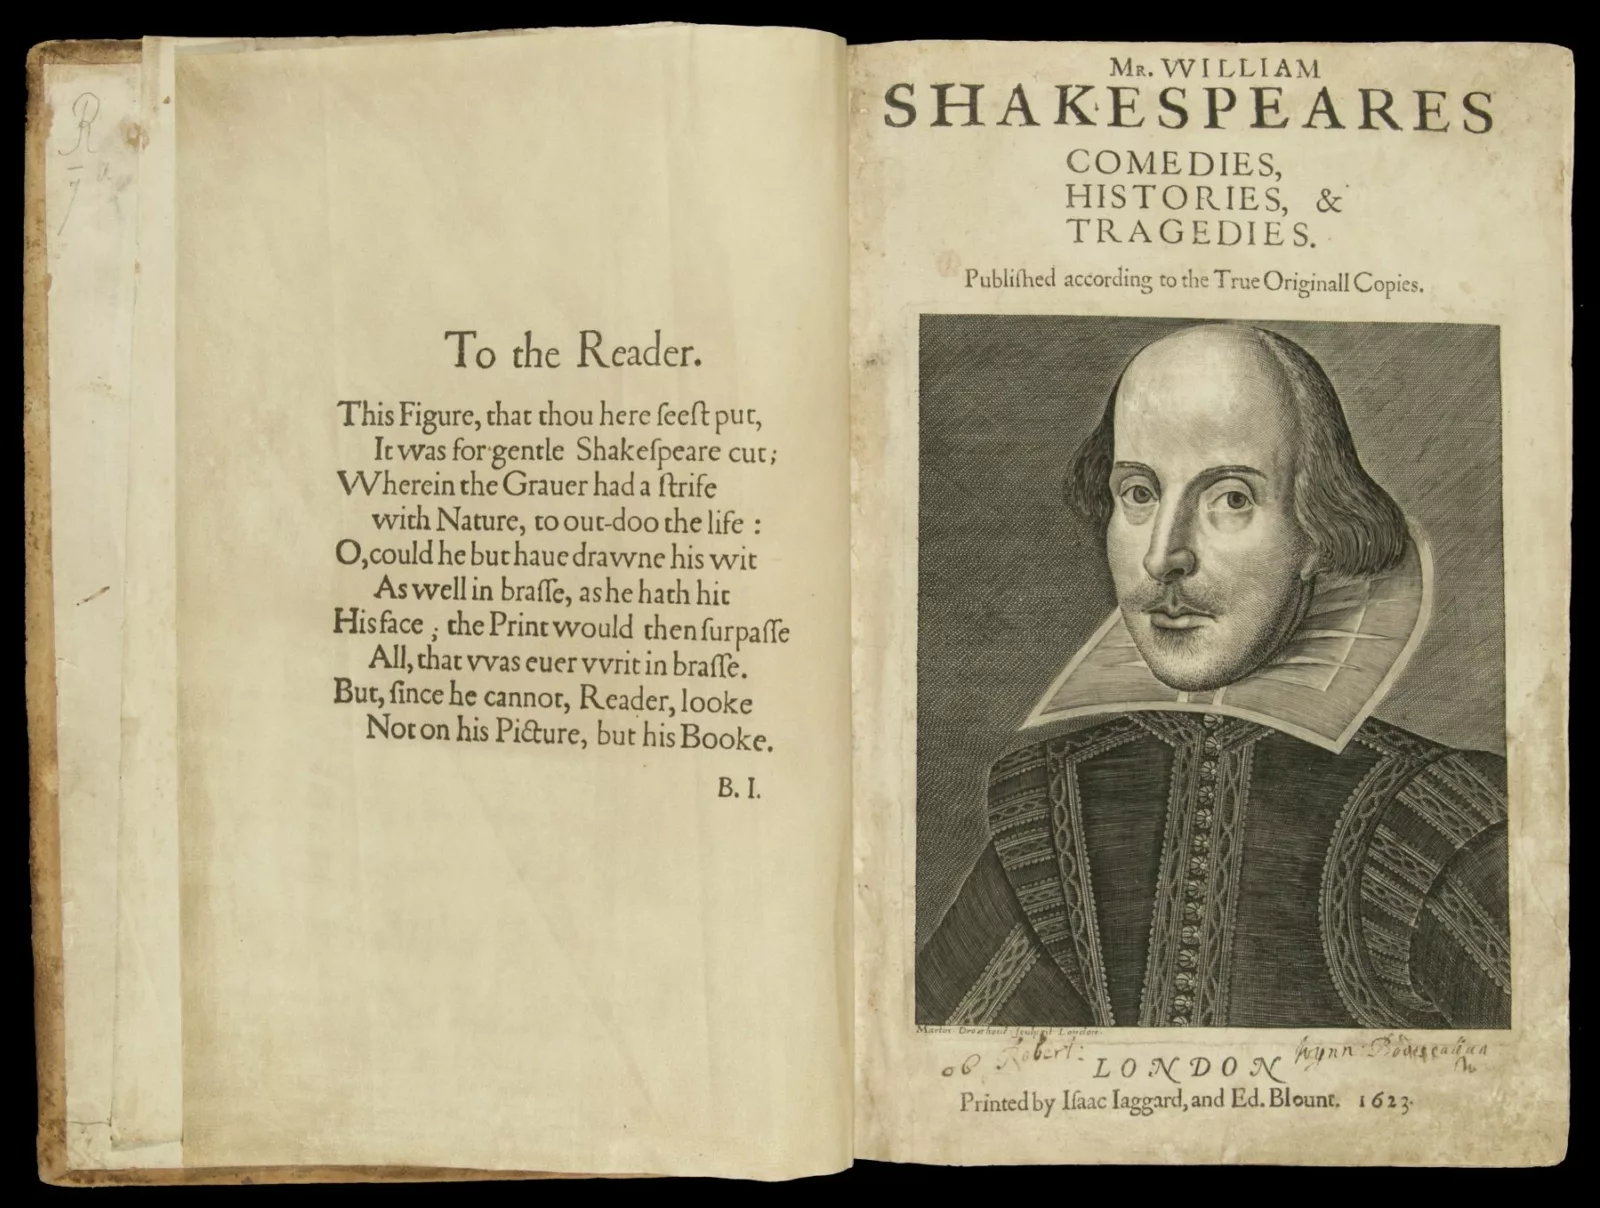 Shakespeare’s iconic portrait appears on a title page under the words “Mr. William Shakespeares Comedies, Histories, and Tragedies. Published according to the True Originall Copies.”